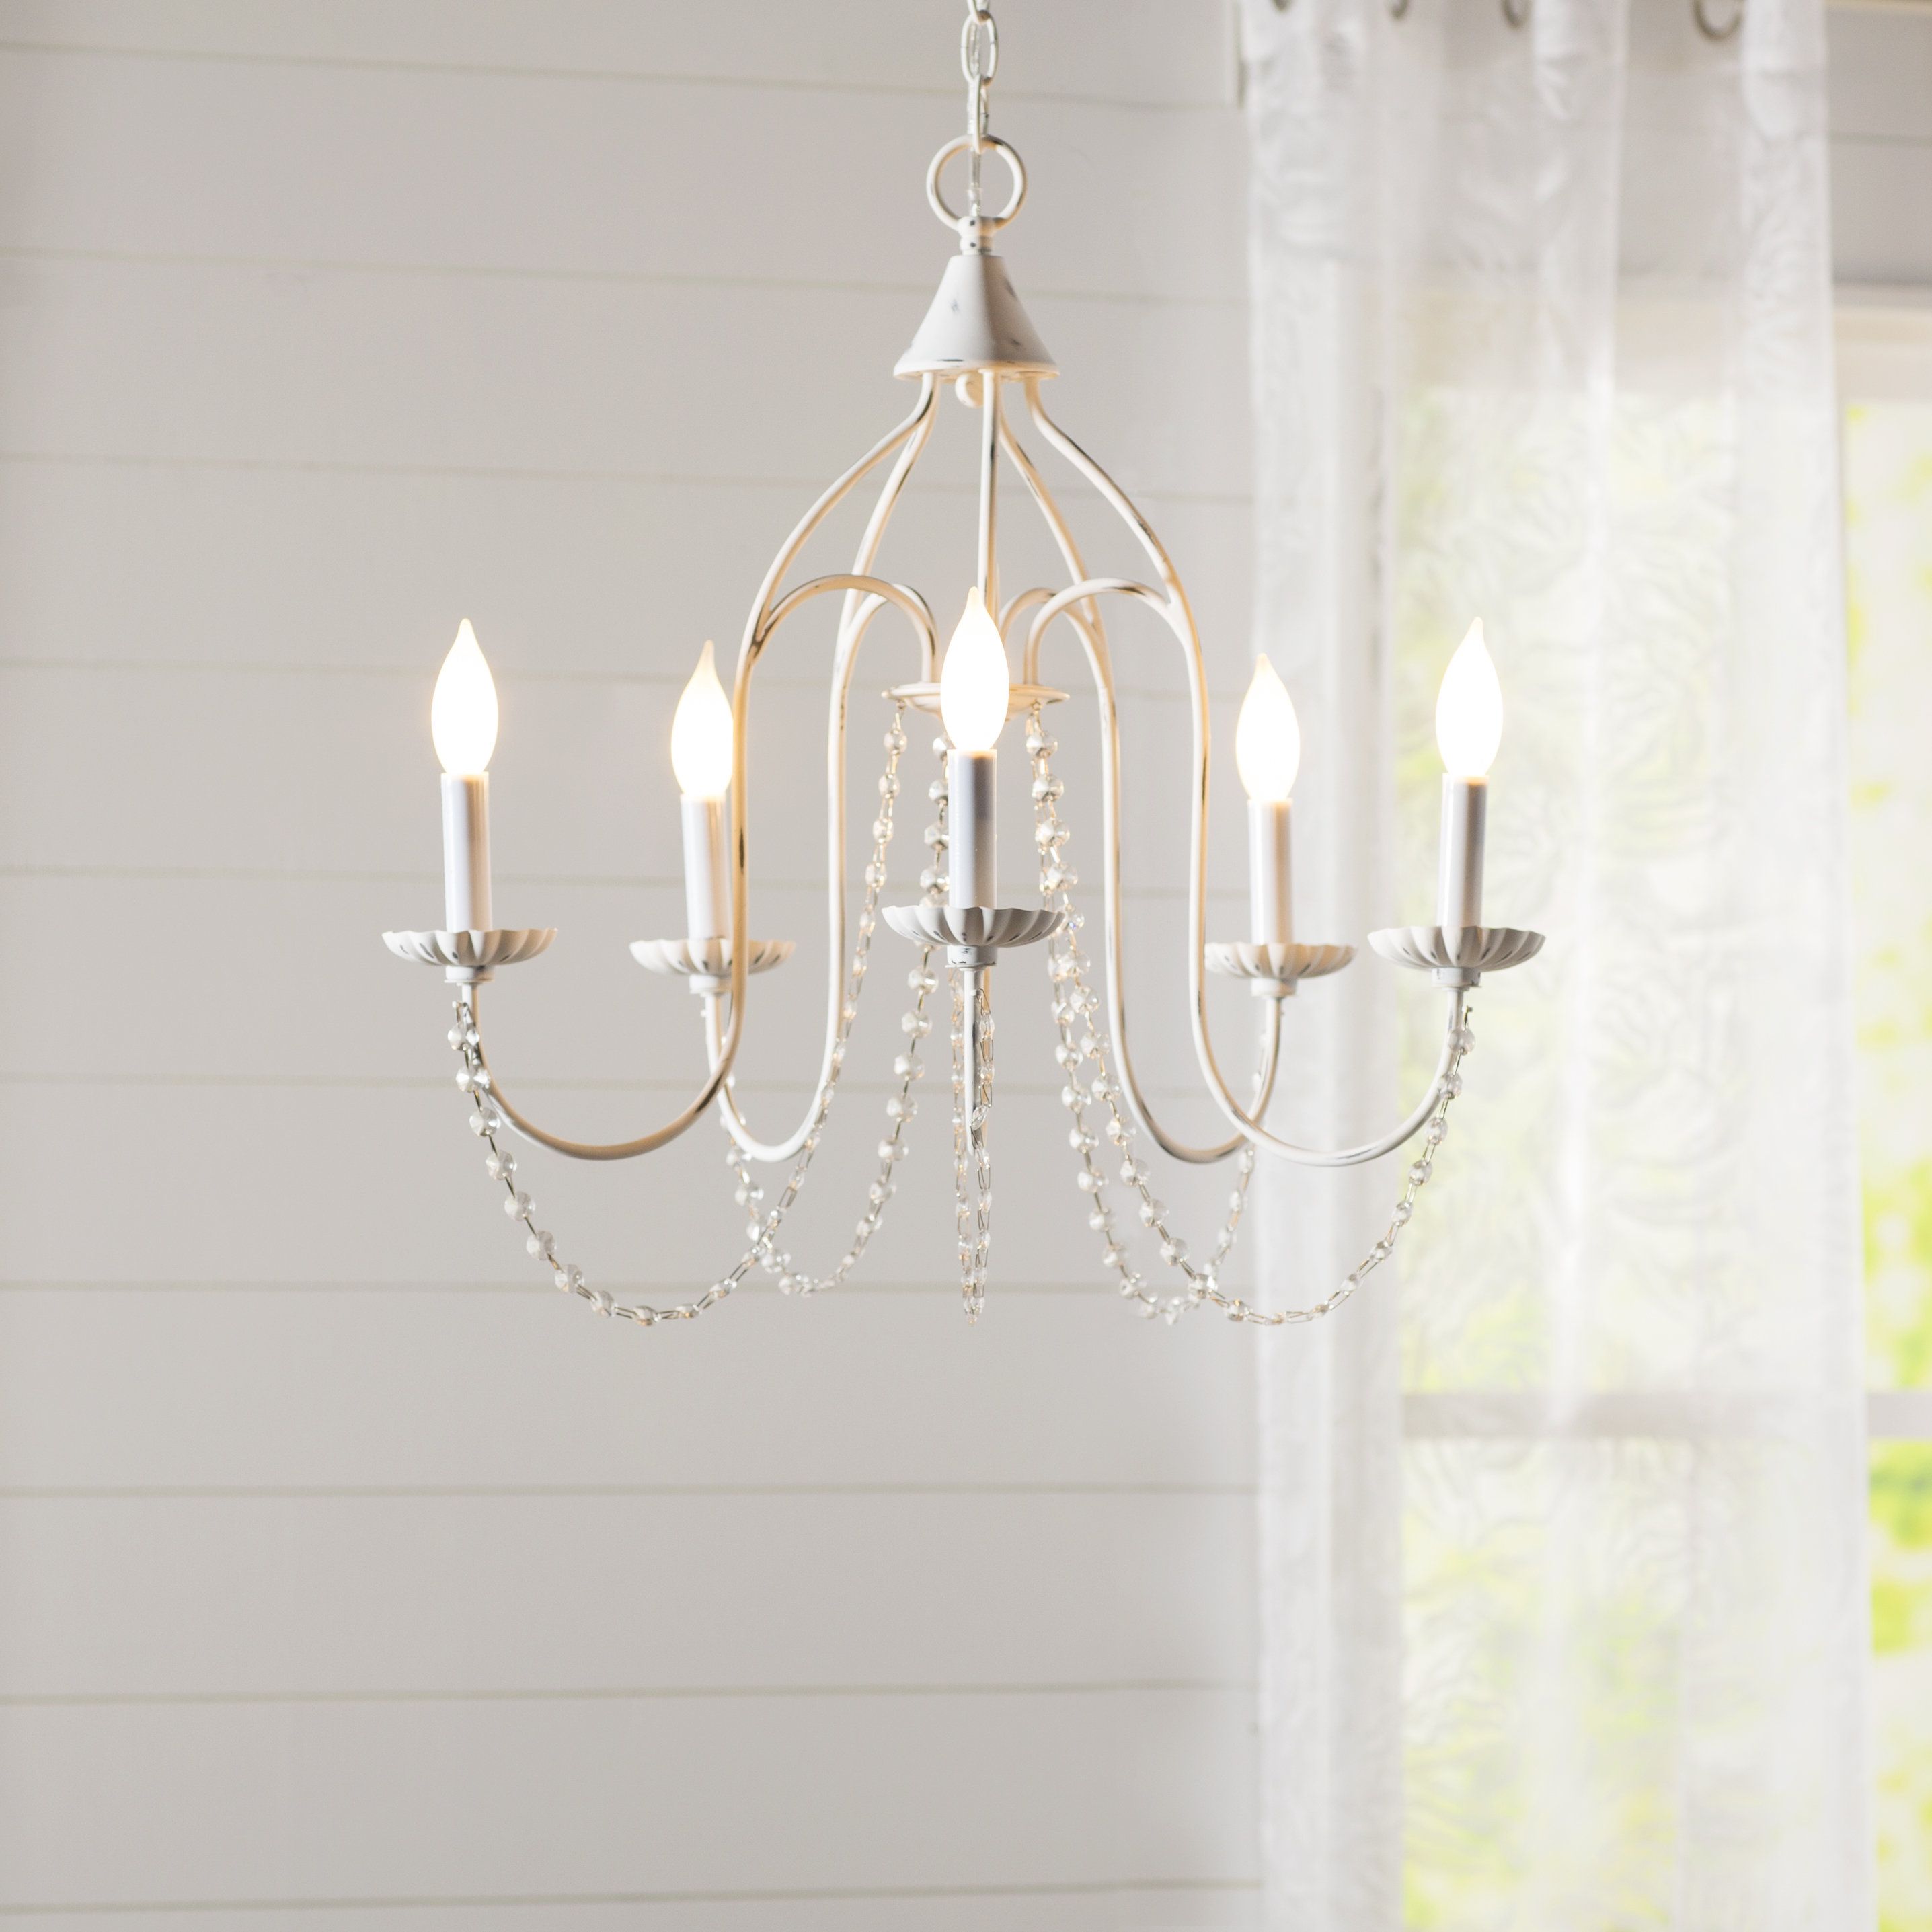 Florentina 5 Light Candle Style Chandelier Throughout Florentina 5 Light Candle Style Chandeliers (Photo 1 of 30)